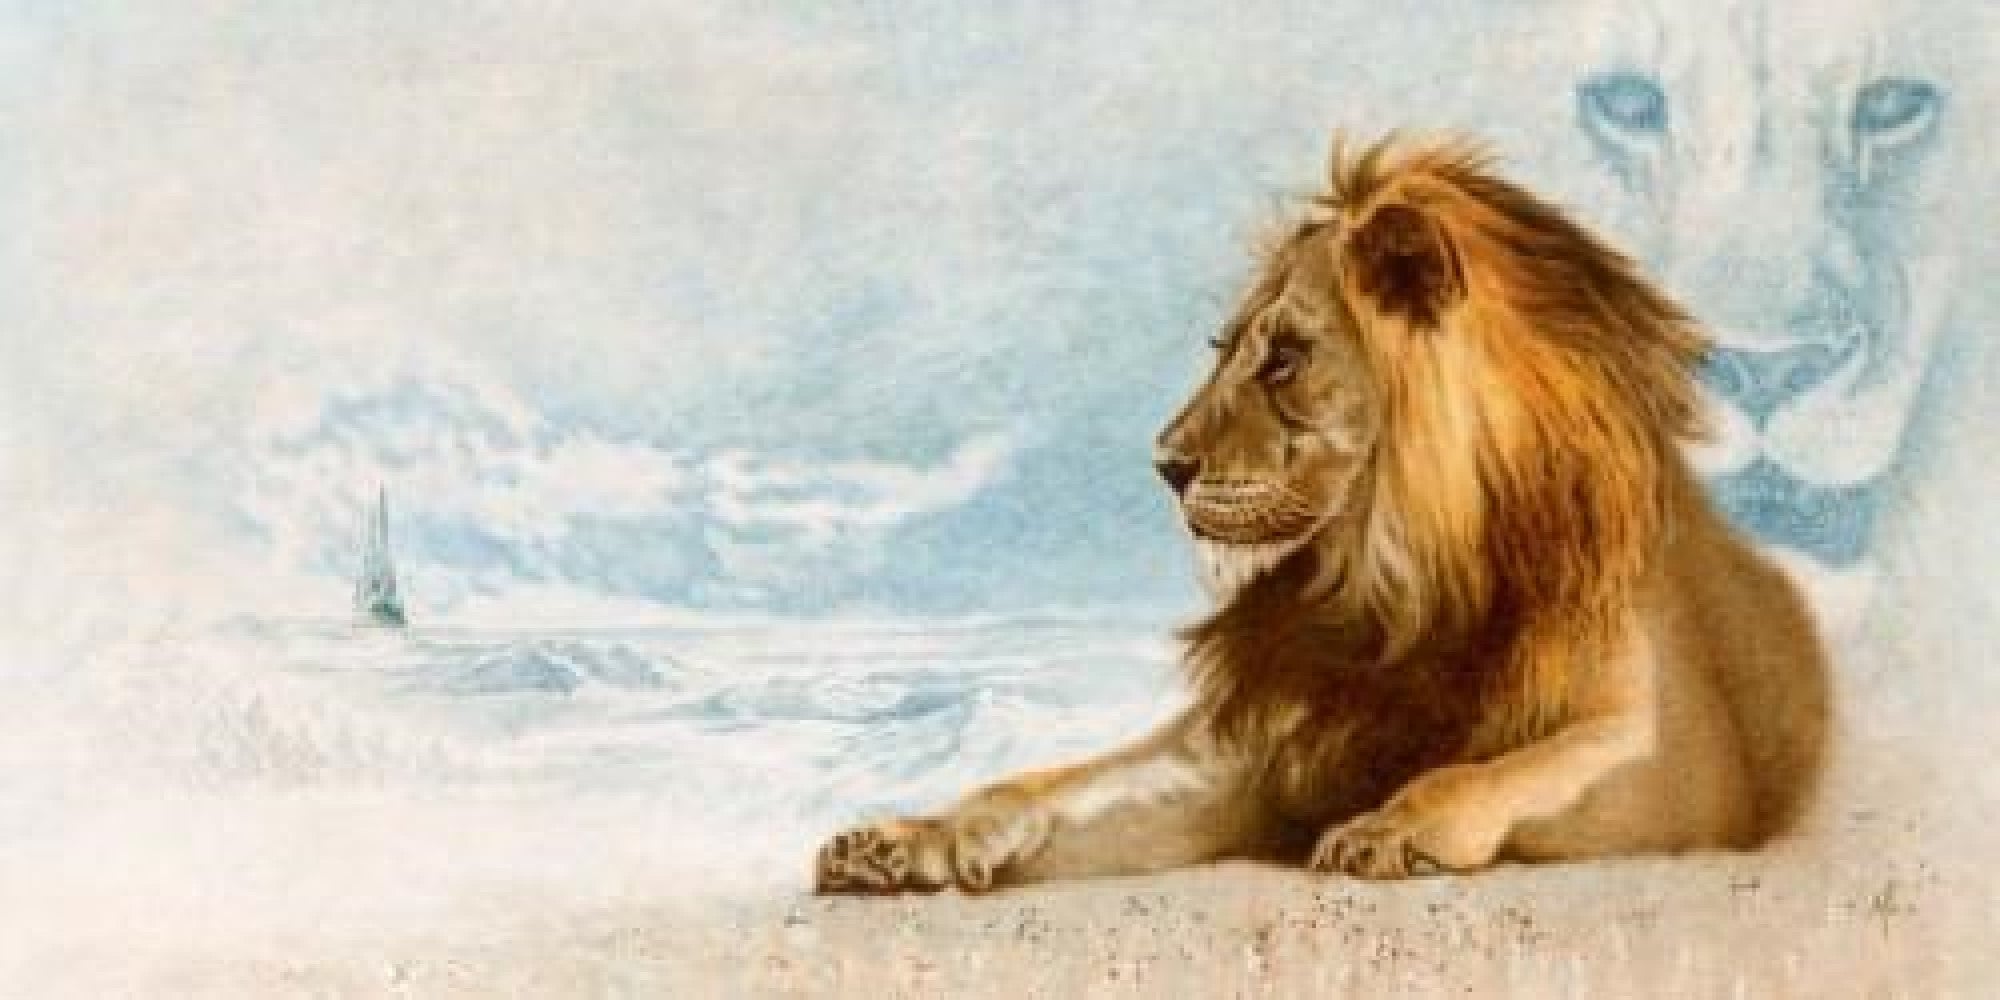 The Great Lion by Mike Kupka inspired by The Chronicles of Narnia